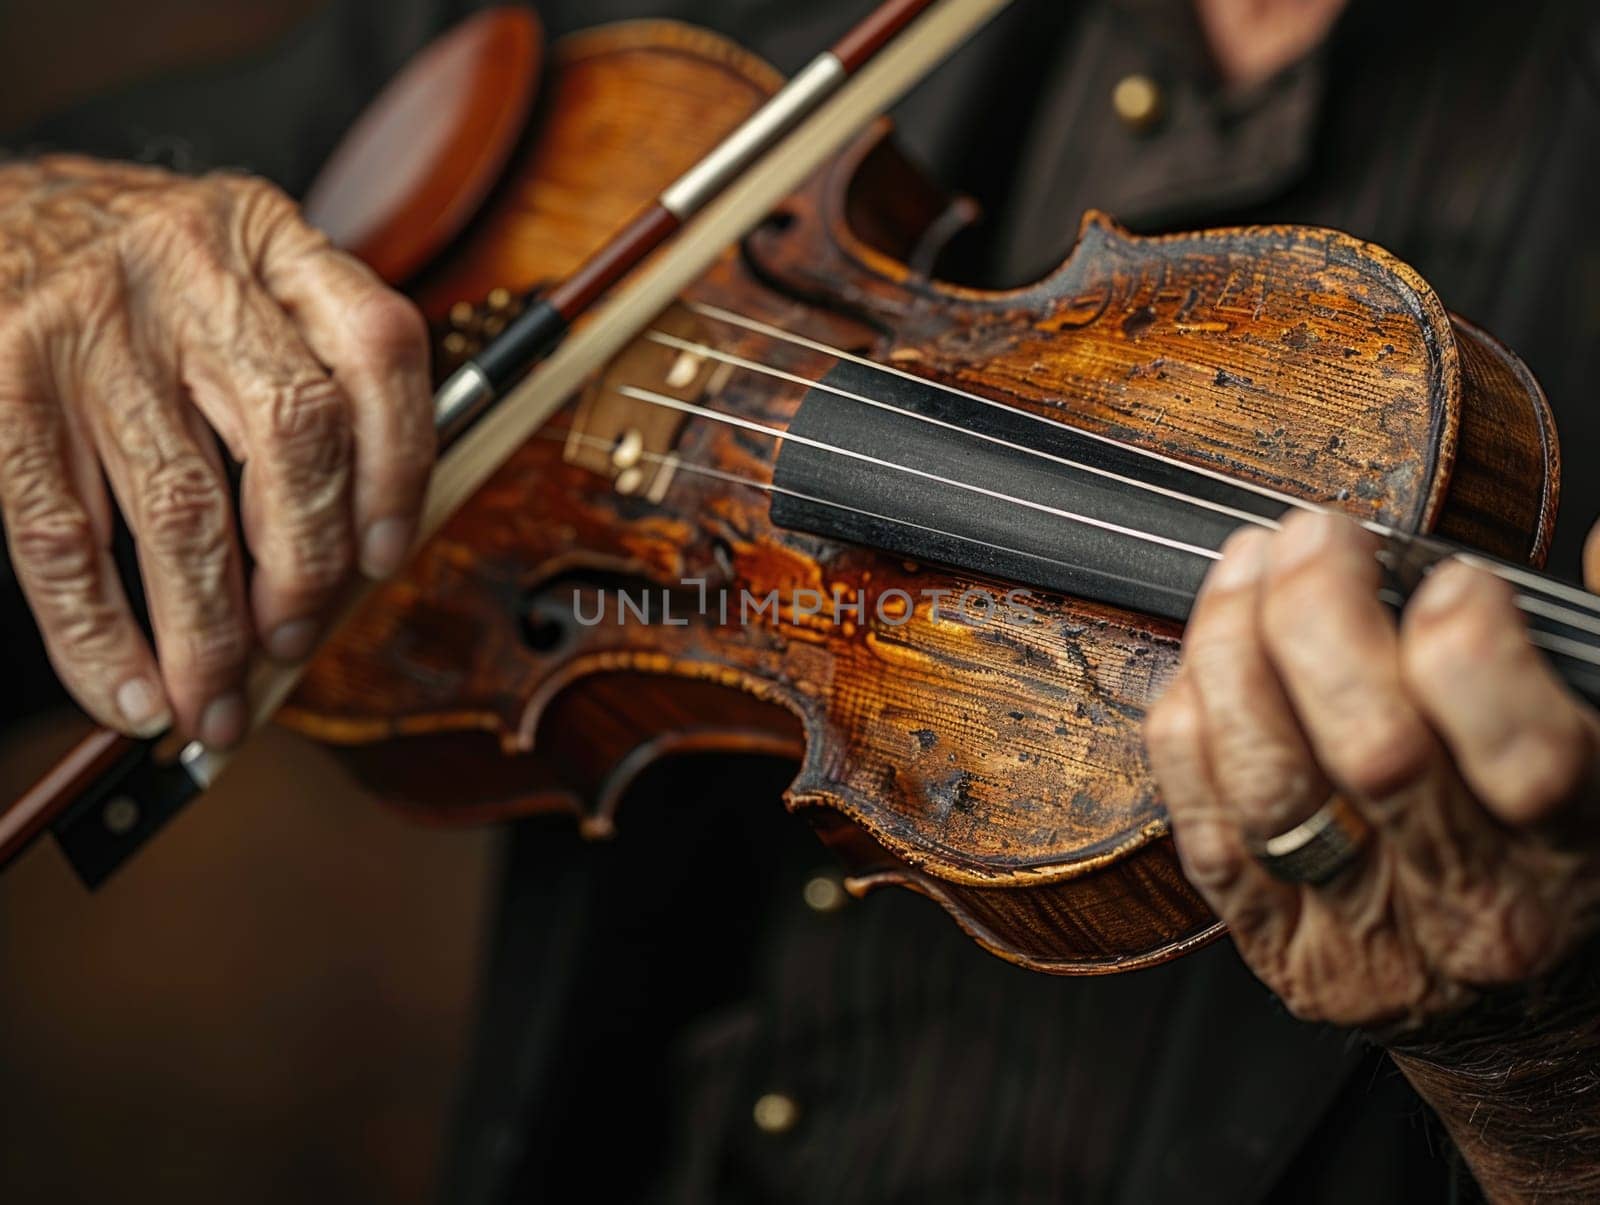 A close-up view showcasing a master violinist skillfully playing the violin with precision and expertise.